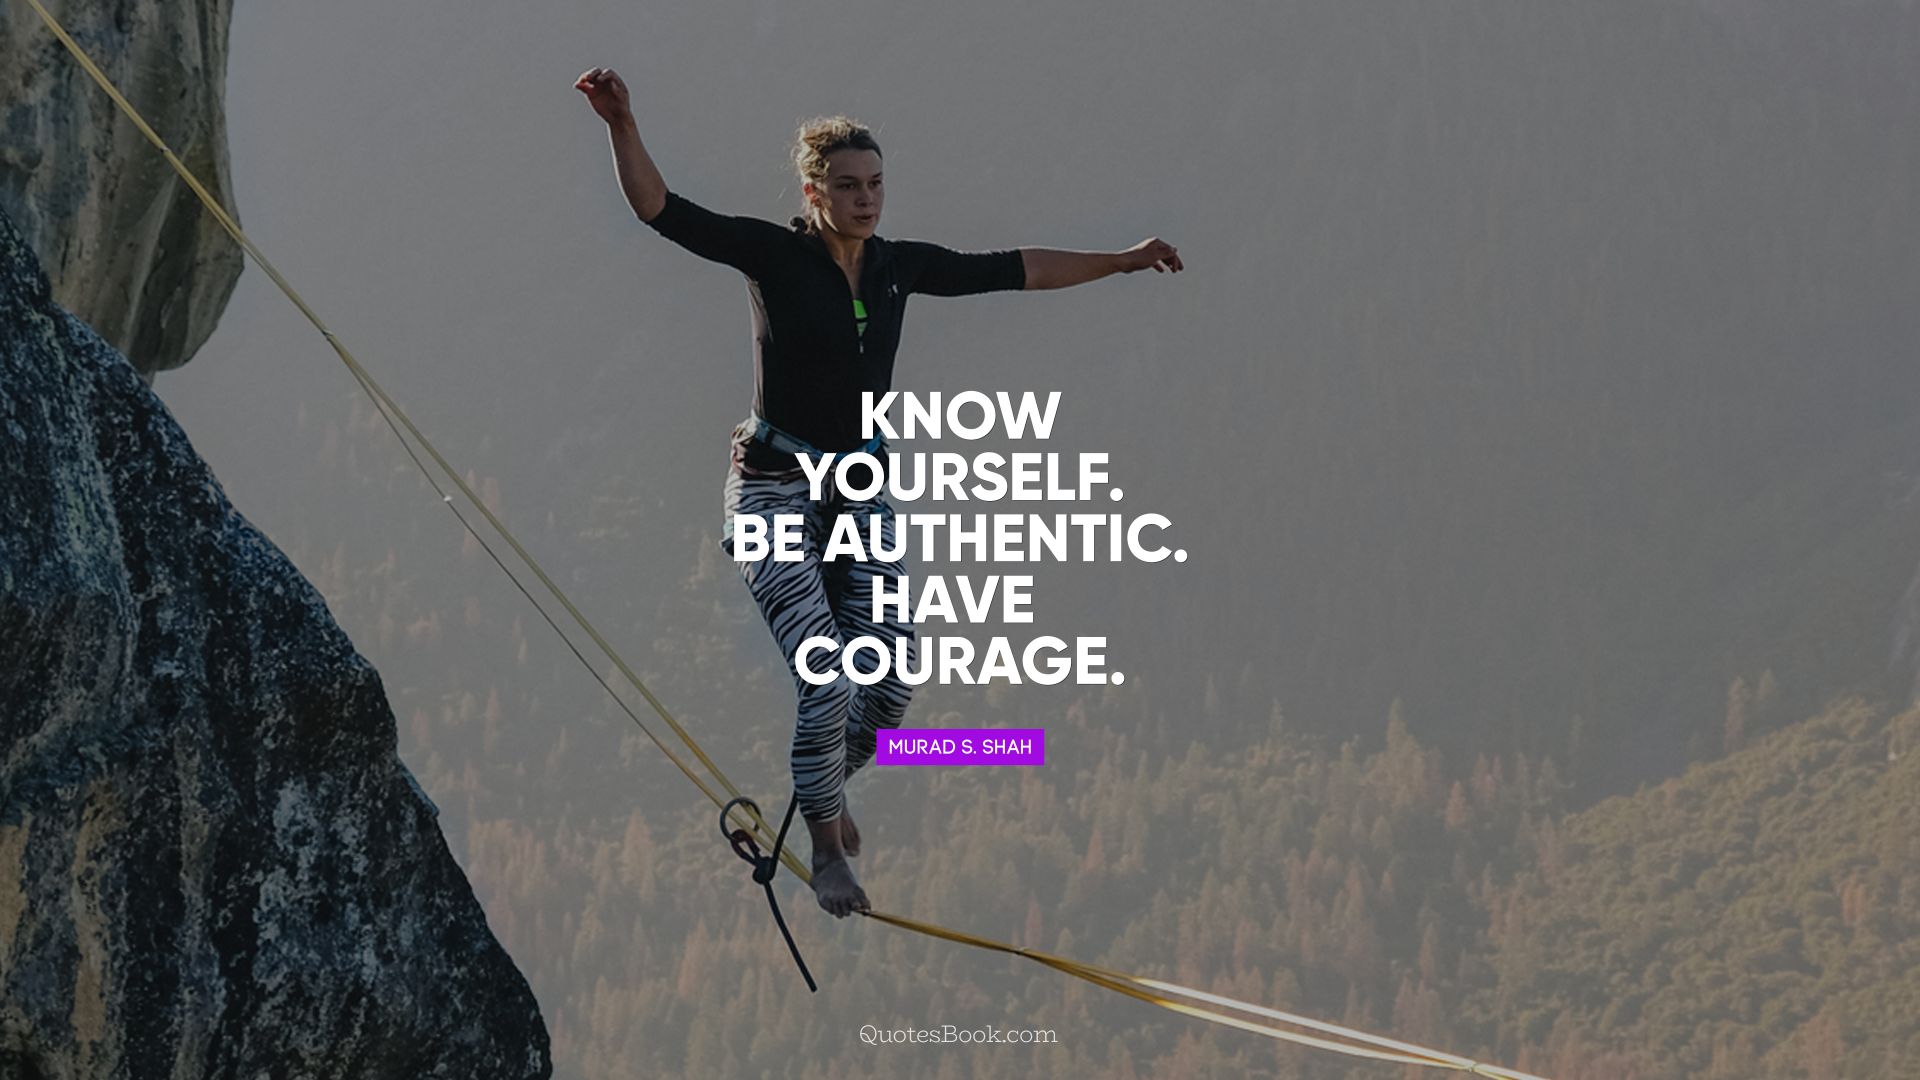 Know yourself. Be authentic. Have courage. - Quote by Murad S. Shah